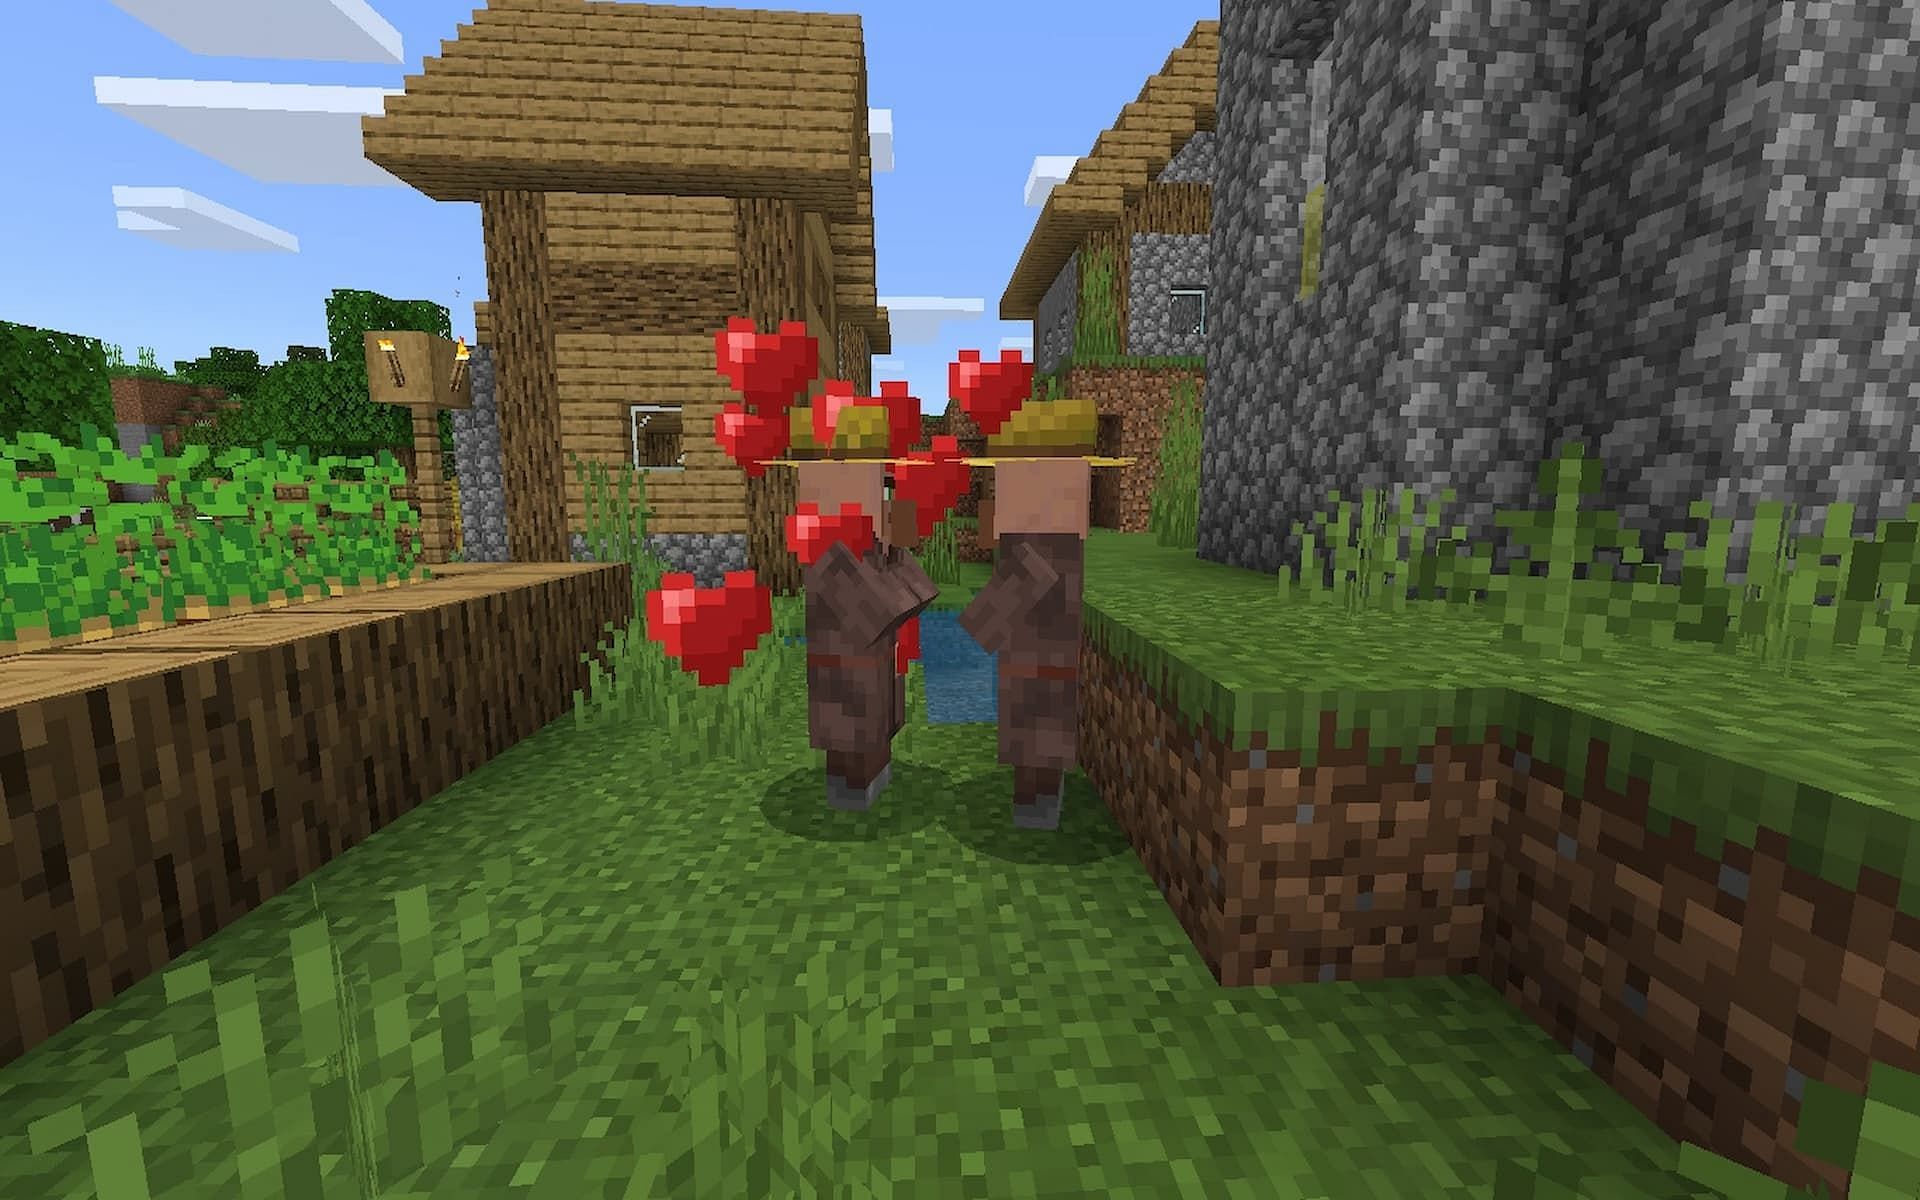 Players can breed many different mobs in game (Image via Minecraft.Fandom.com)